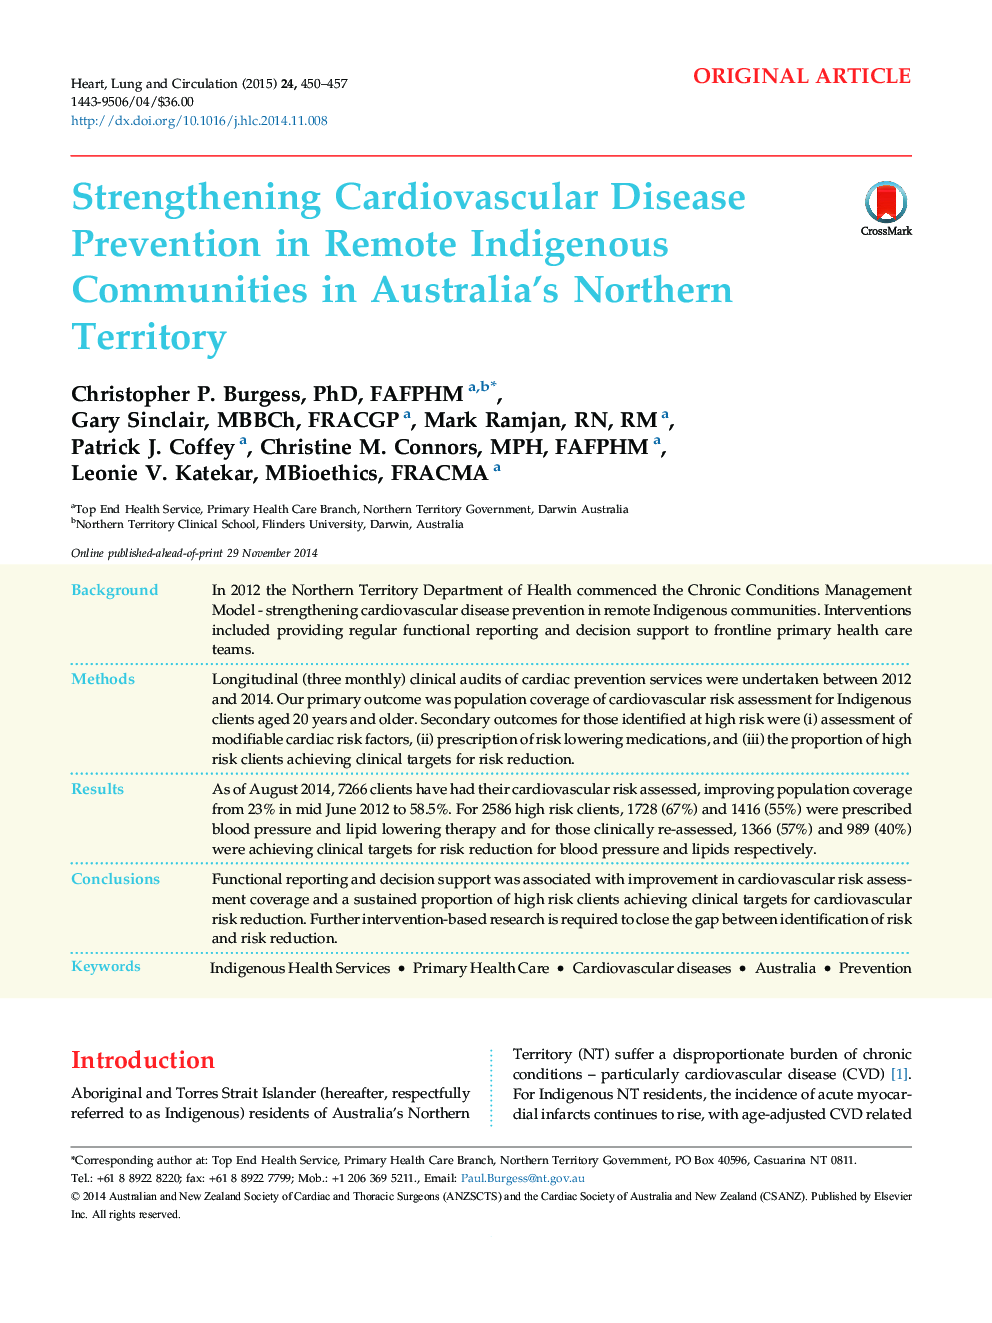 Strengthening Cardiovascular Disease Prevention in Remote Indigenous Communities in Australia's Northern Territory